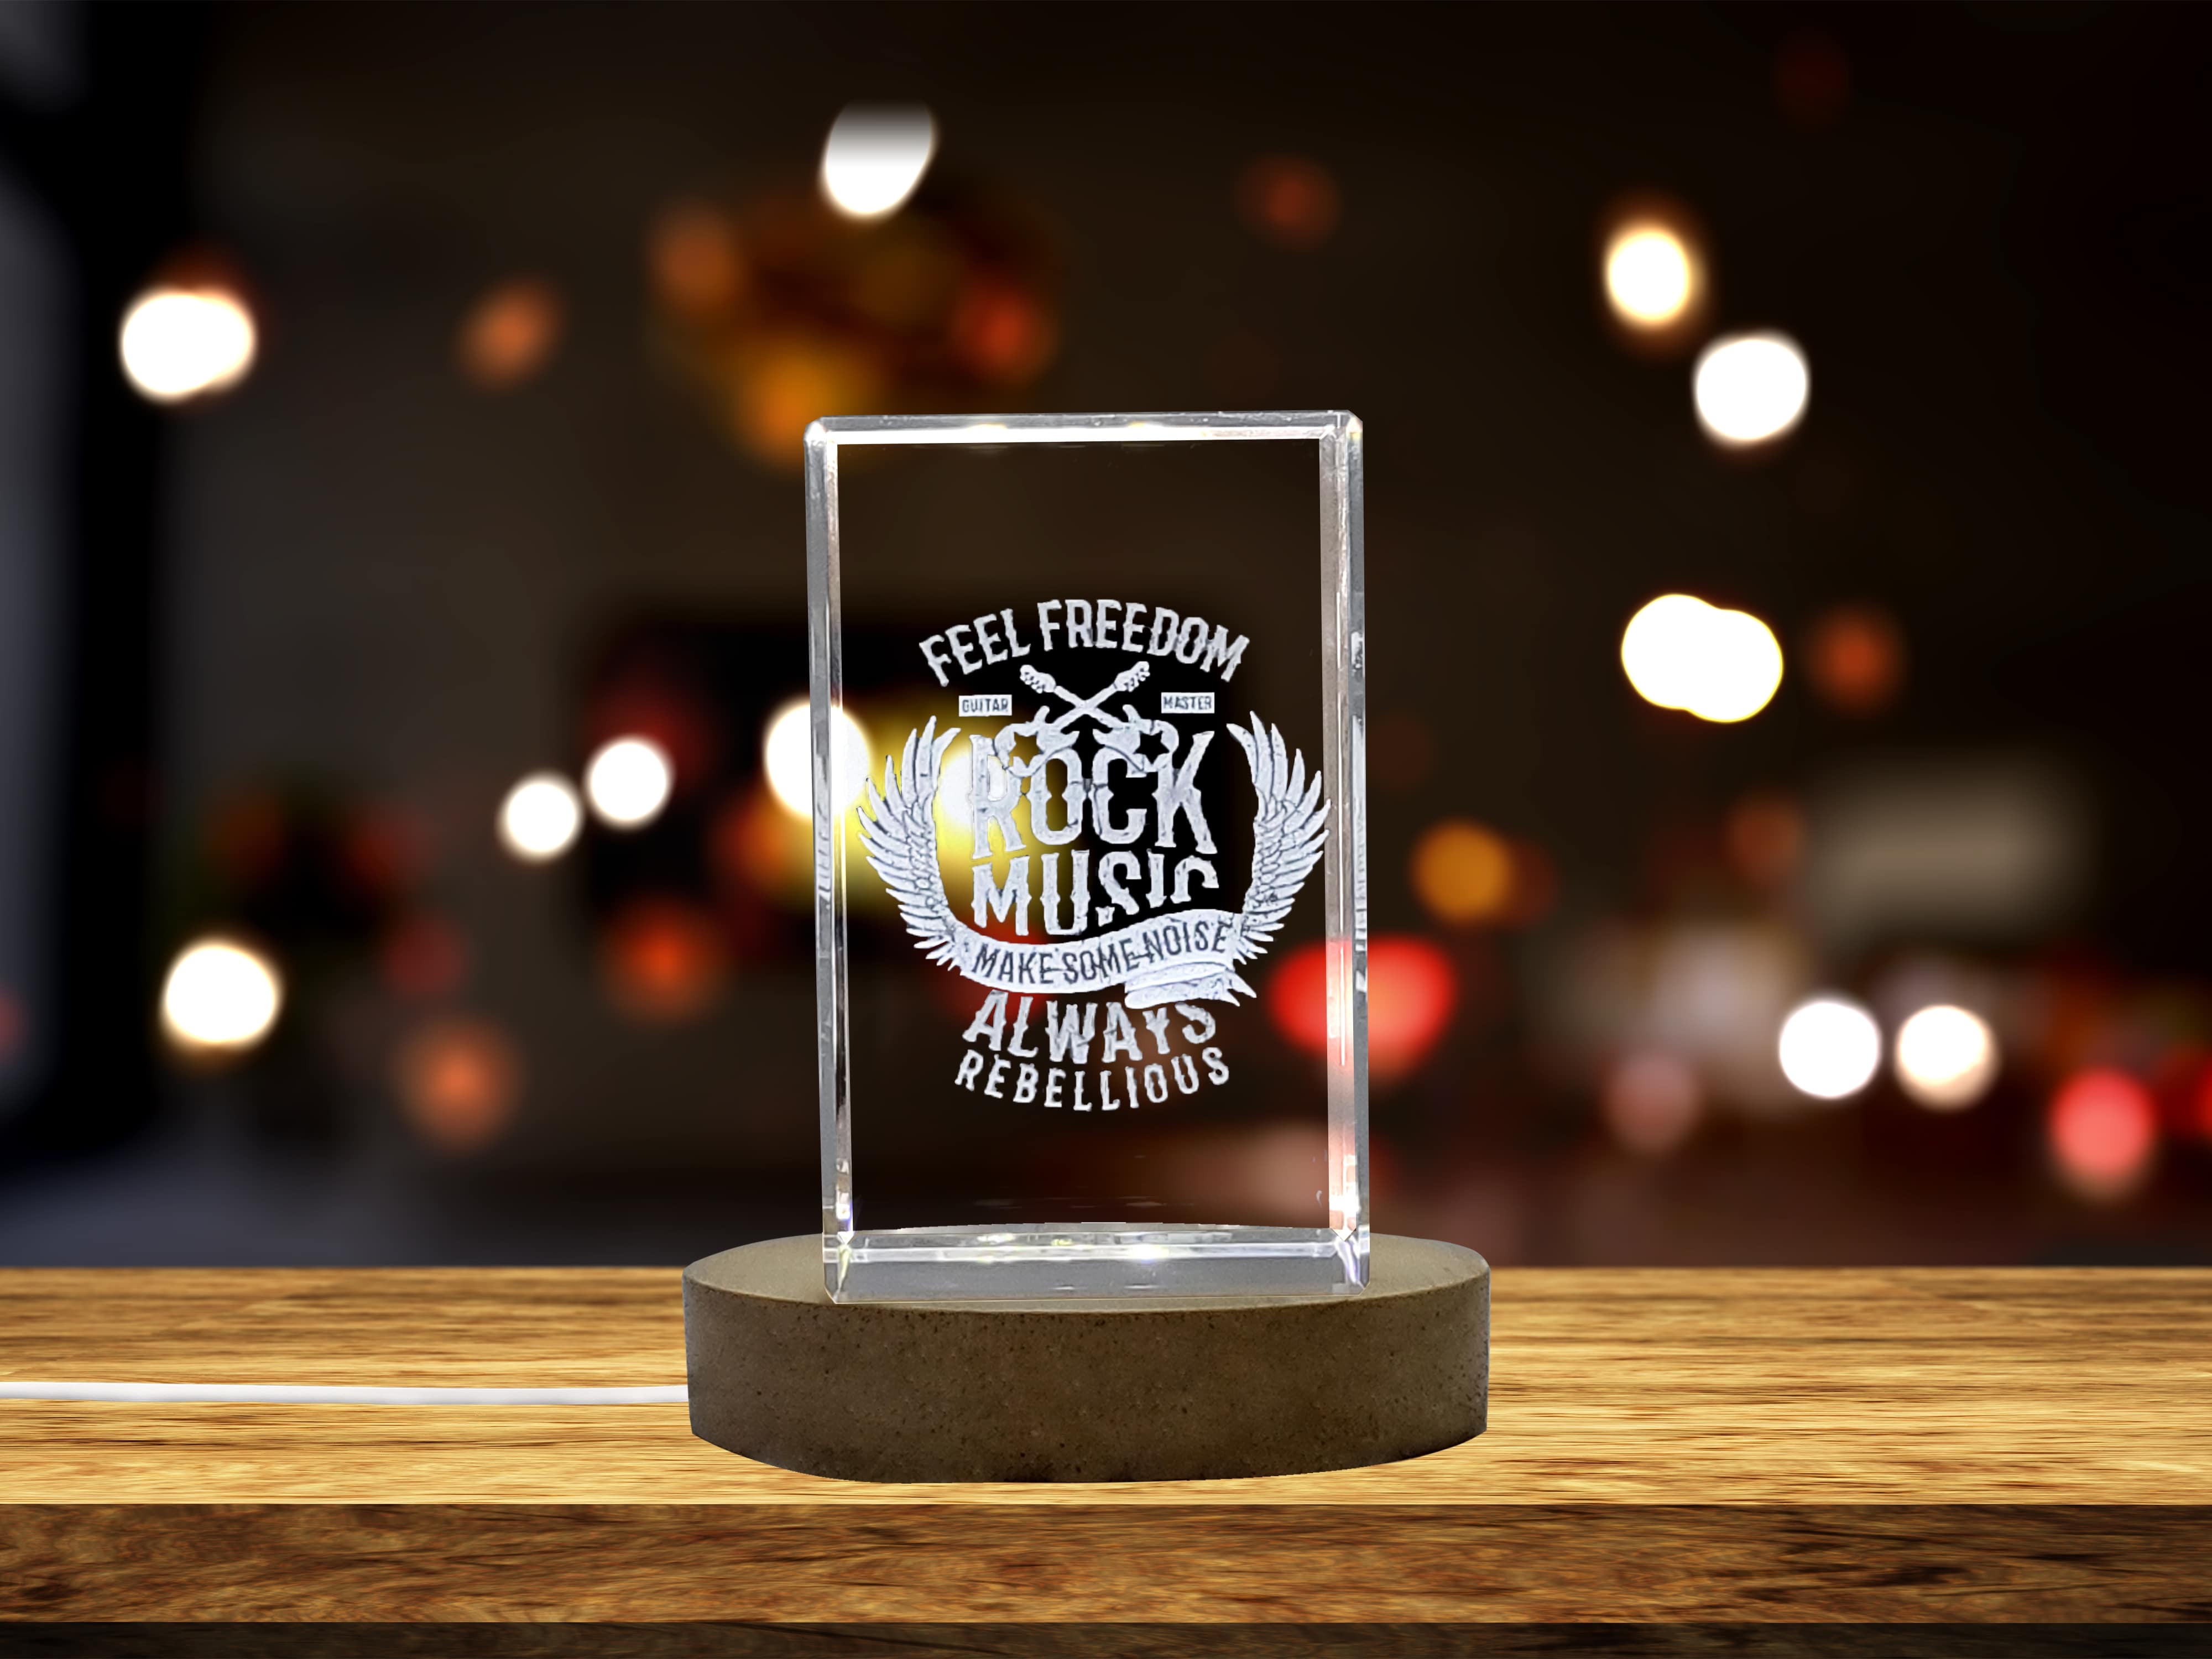 Unique 3D Engraved Crystal with Rock Music Concept Vector Design - Perfect Gift for Music Lovers A&B Crystal Collection